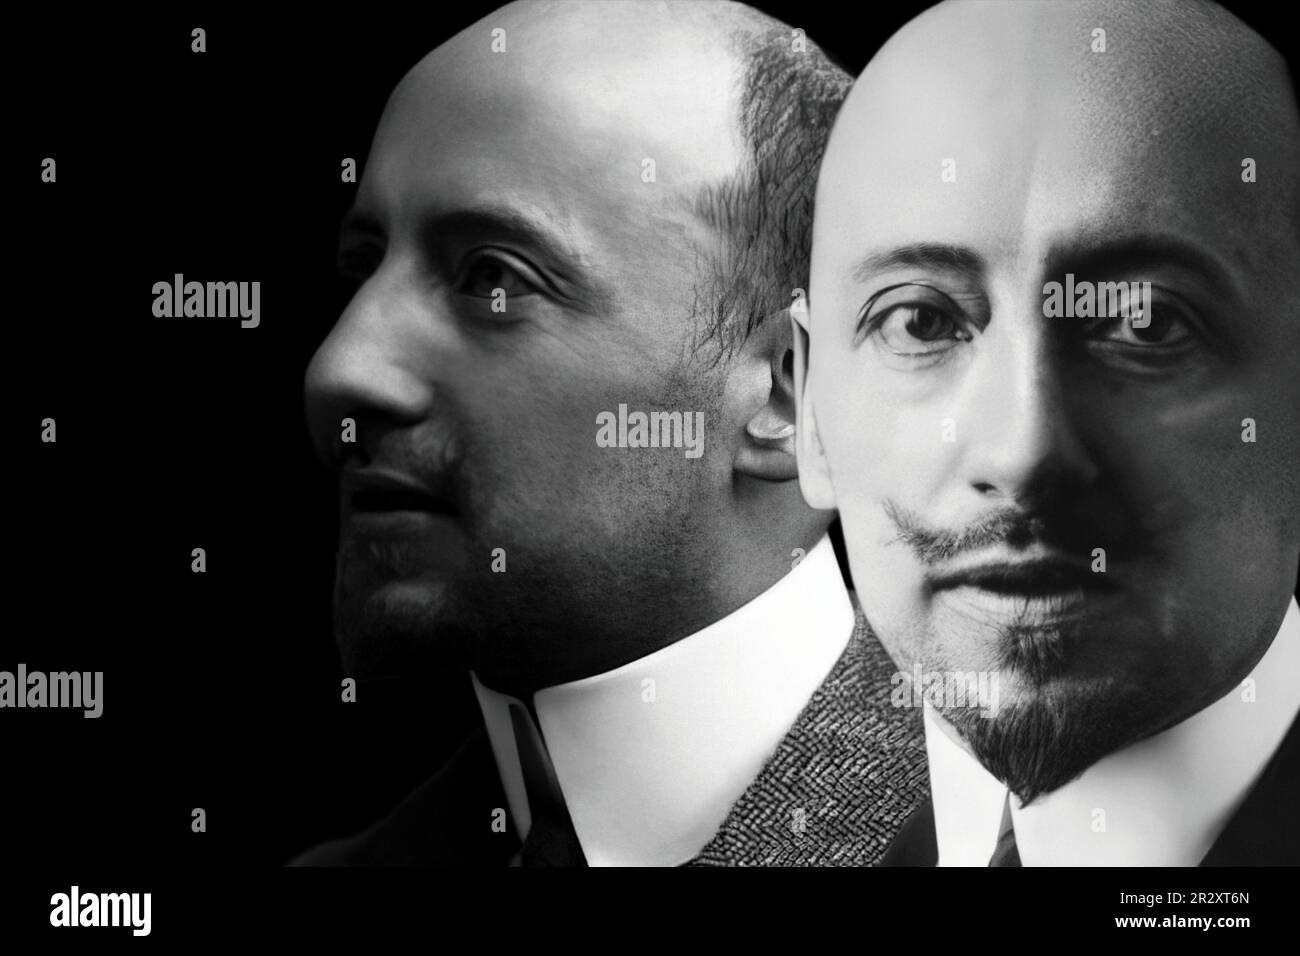 Gabriele d'Annunzio was an Italian writer,poet,playwright,soldier politician, journalist and patriot, famous figure of the First World War Stock Photo